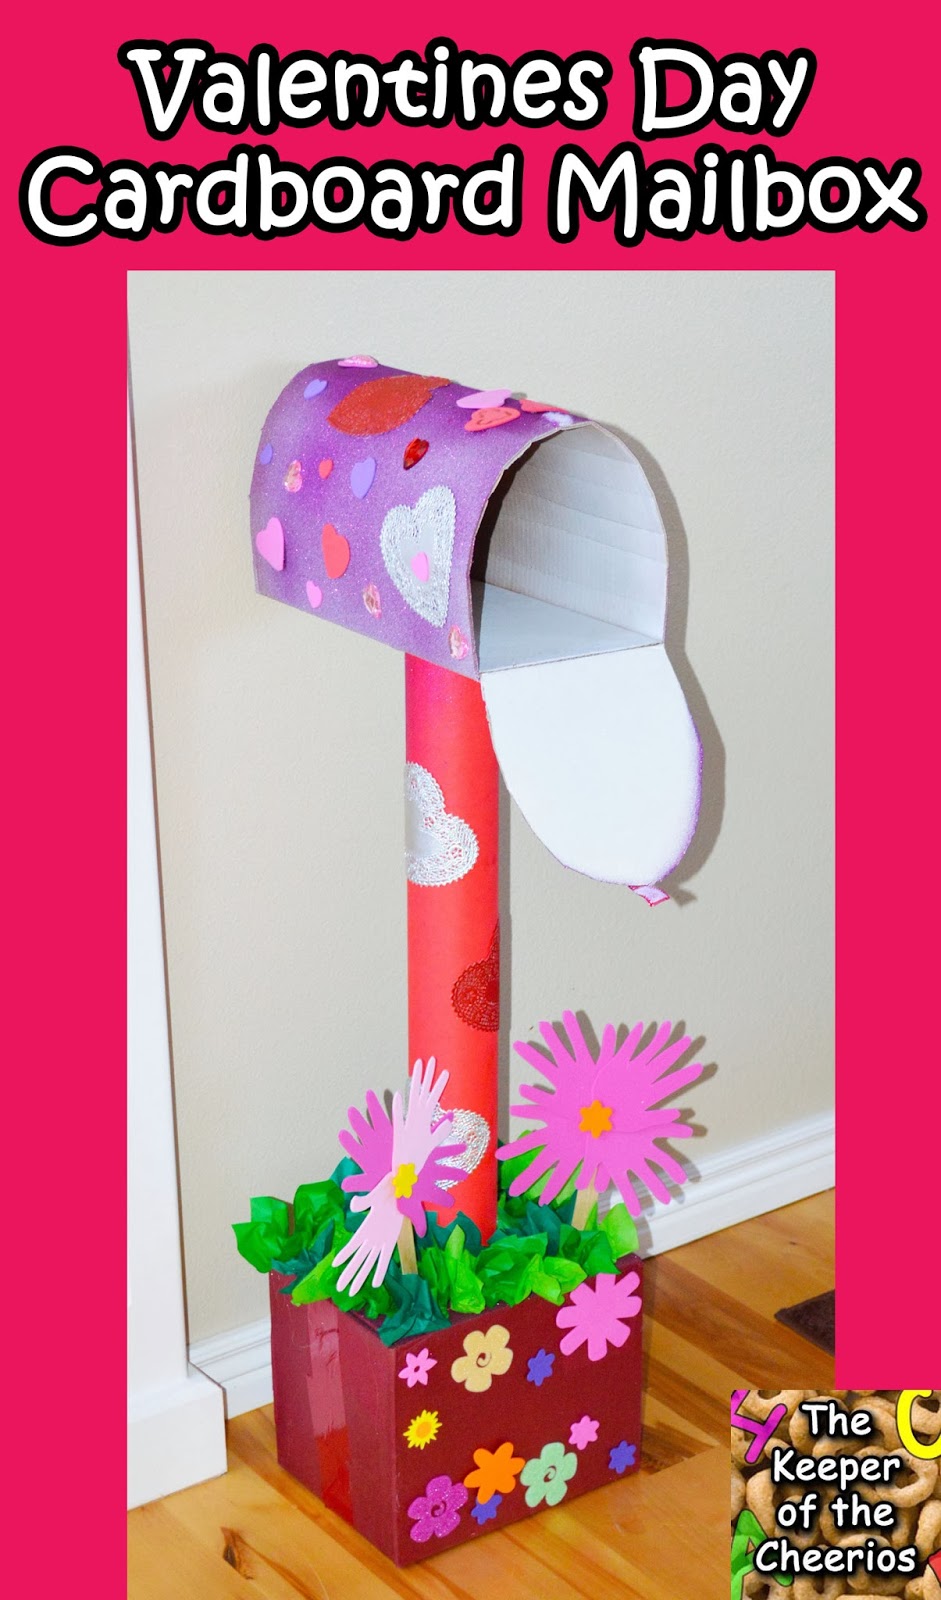 Valentines Day Cardboard Mailbox Diy The Keeper Of The Cheerios